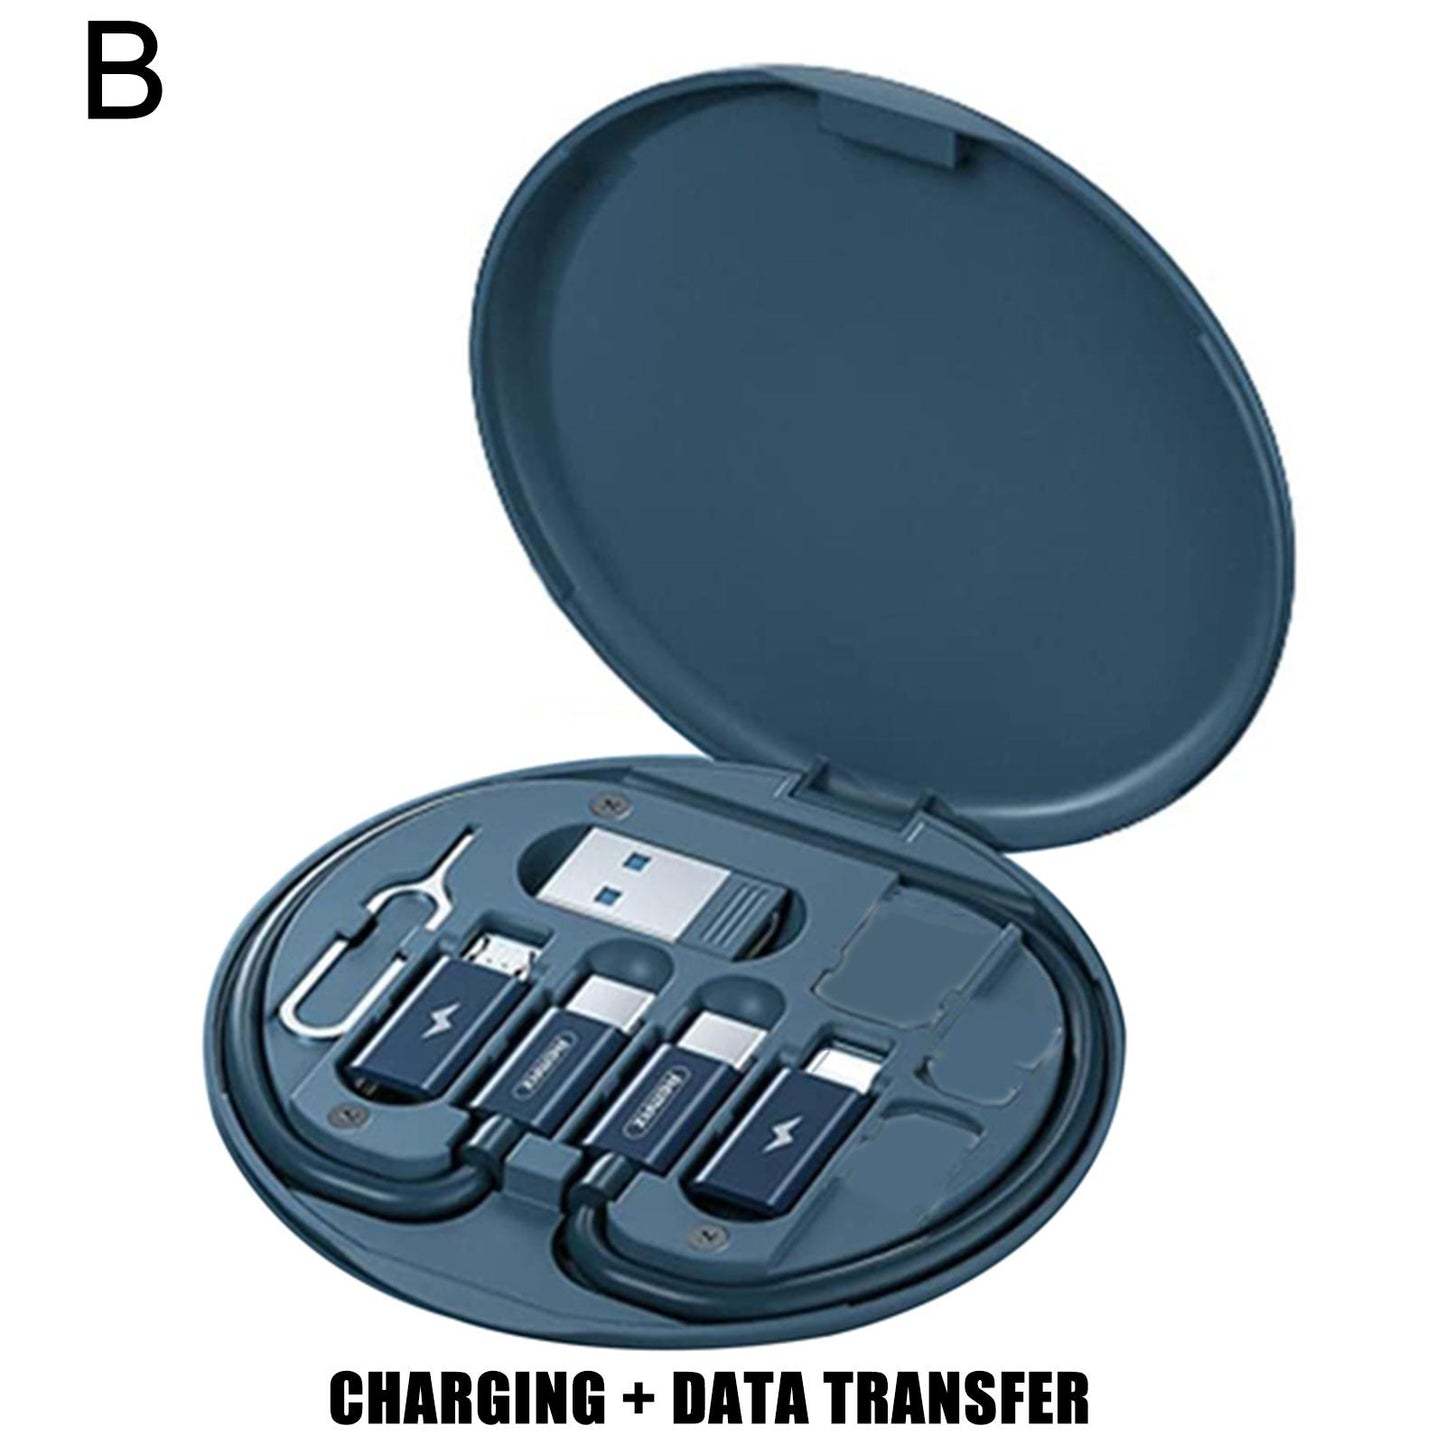 Box for usb cable/data transfer